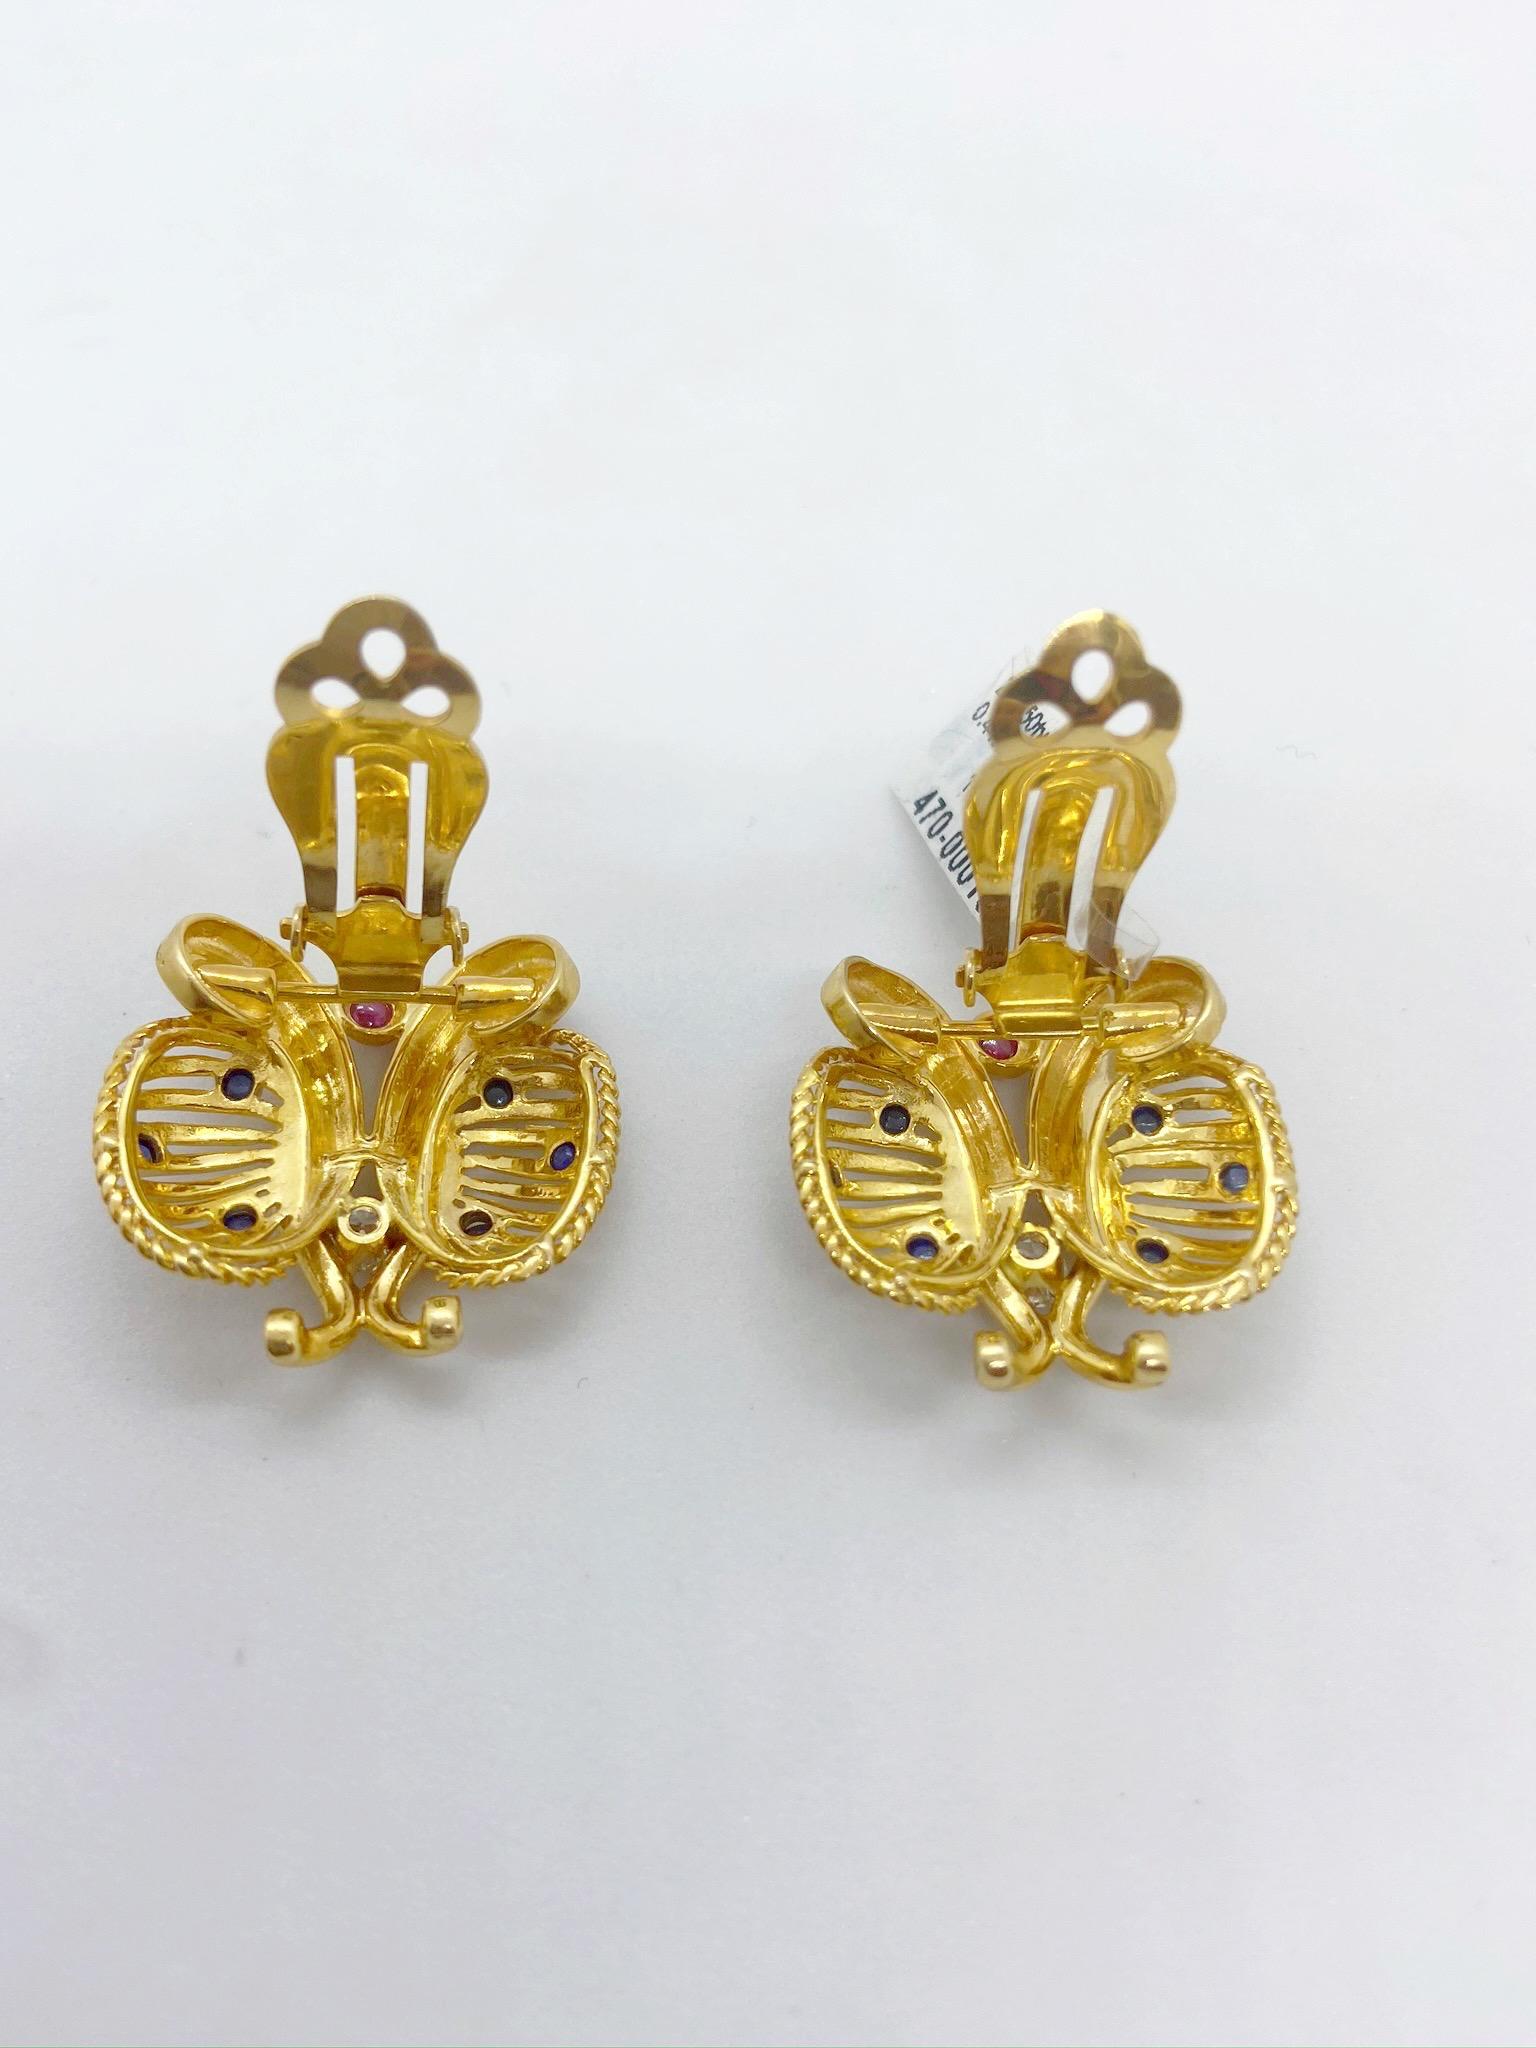 Retro styled 14 karat yellow gold earrings .The Butterfly shaped earrings feature a Round Brilliant Diamond Solitaire in each along with Cabochon Ruby and Blue Sapphires.The clip on earrings measure 7/8